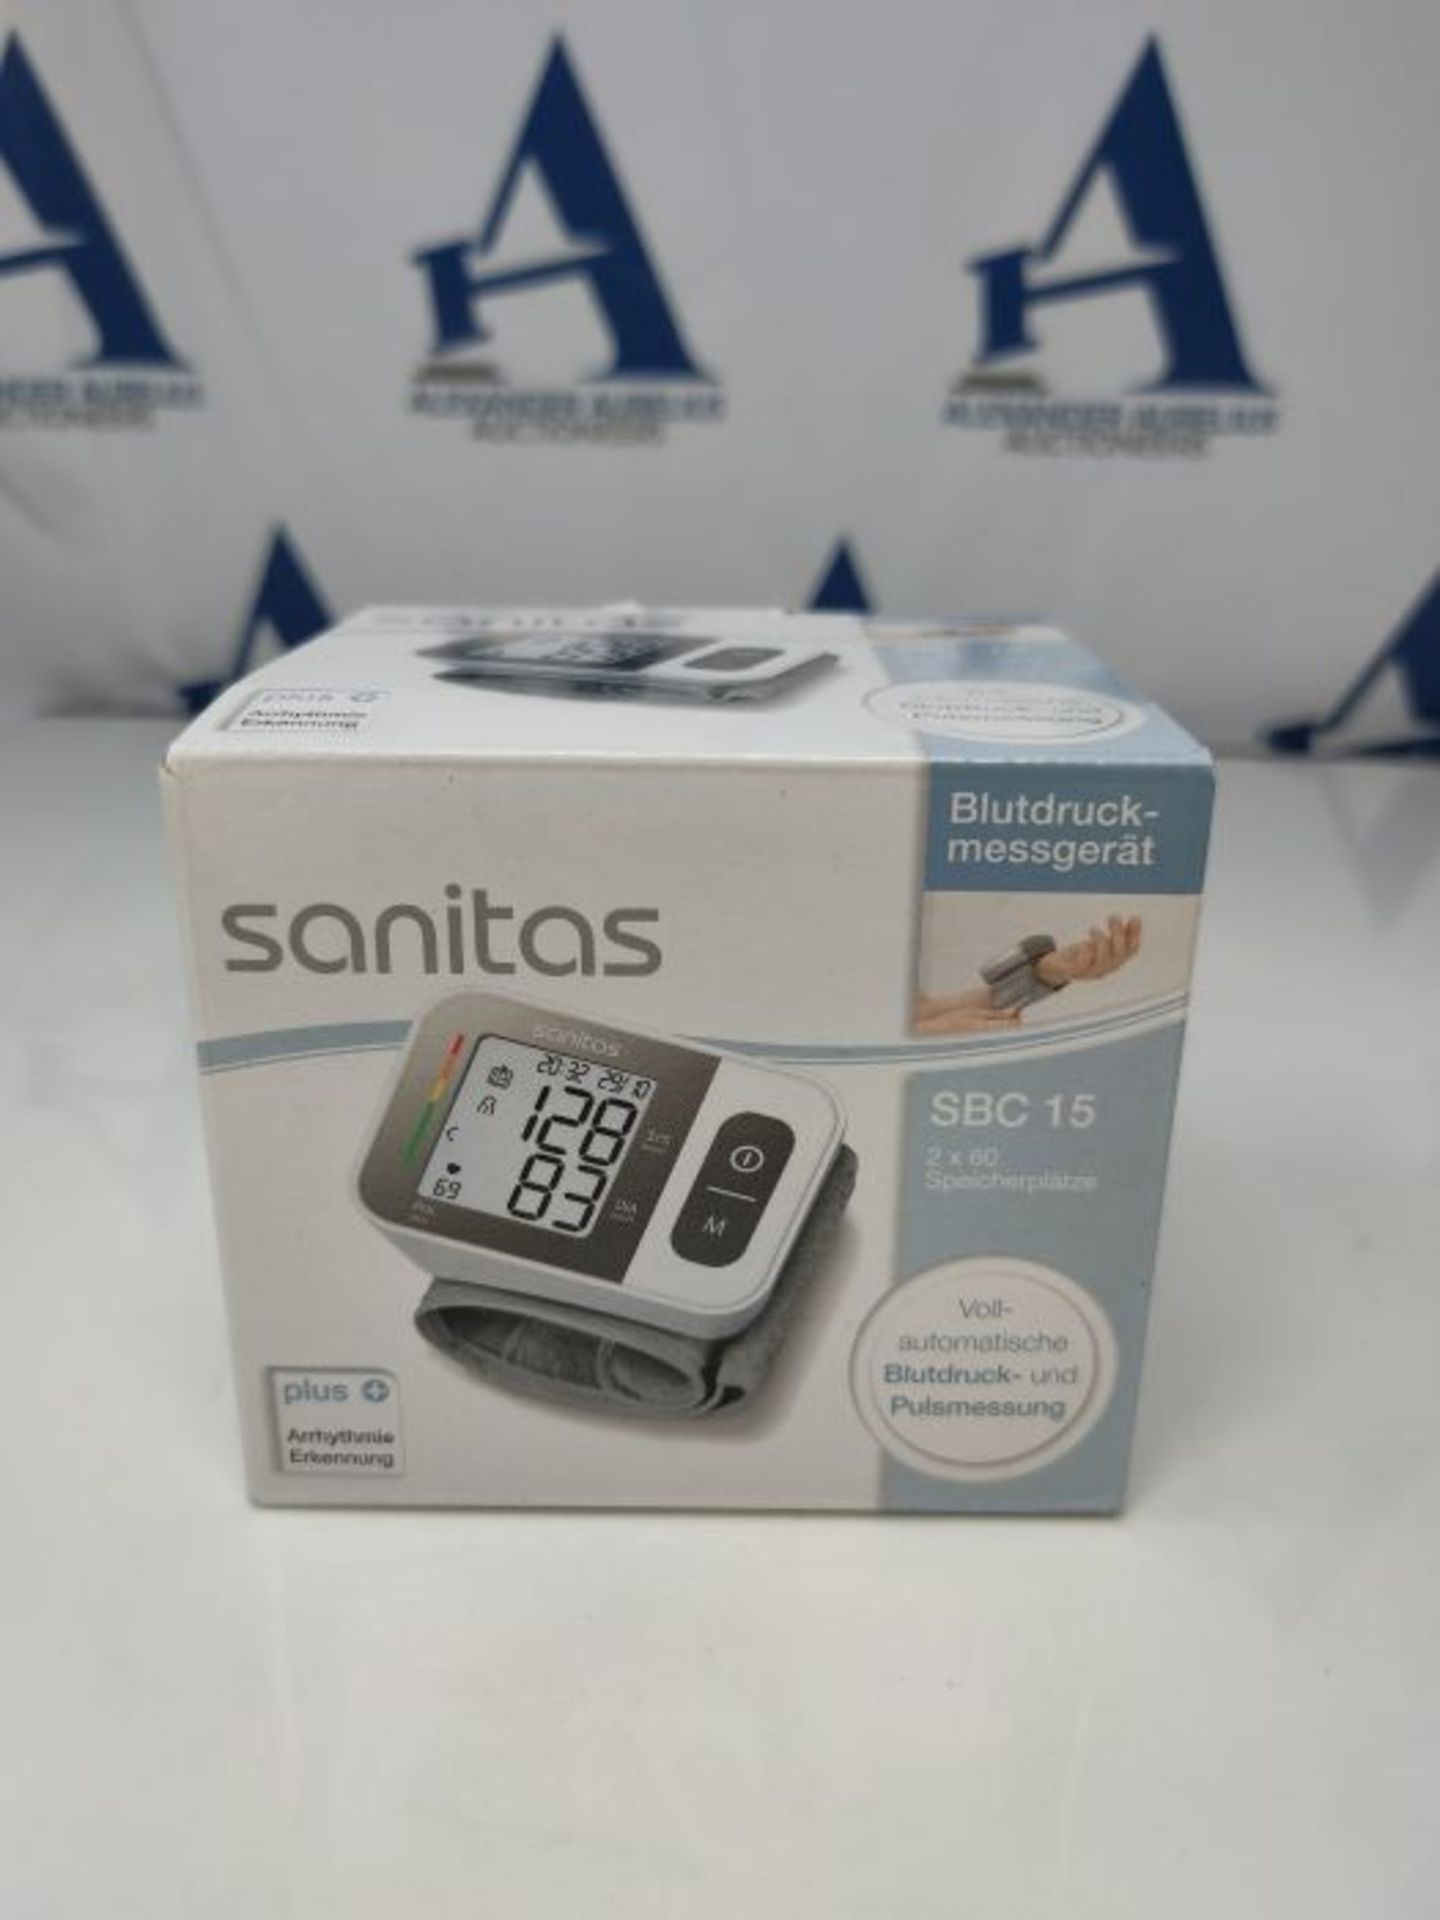 Sanitas SBC 15 Wrist blood pressure monitor, fully automatic blood pressure and pulse - Image 2 of 3